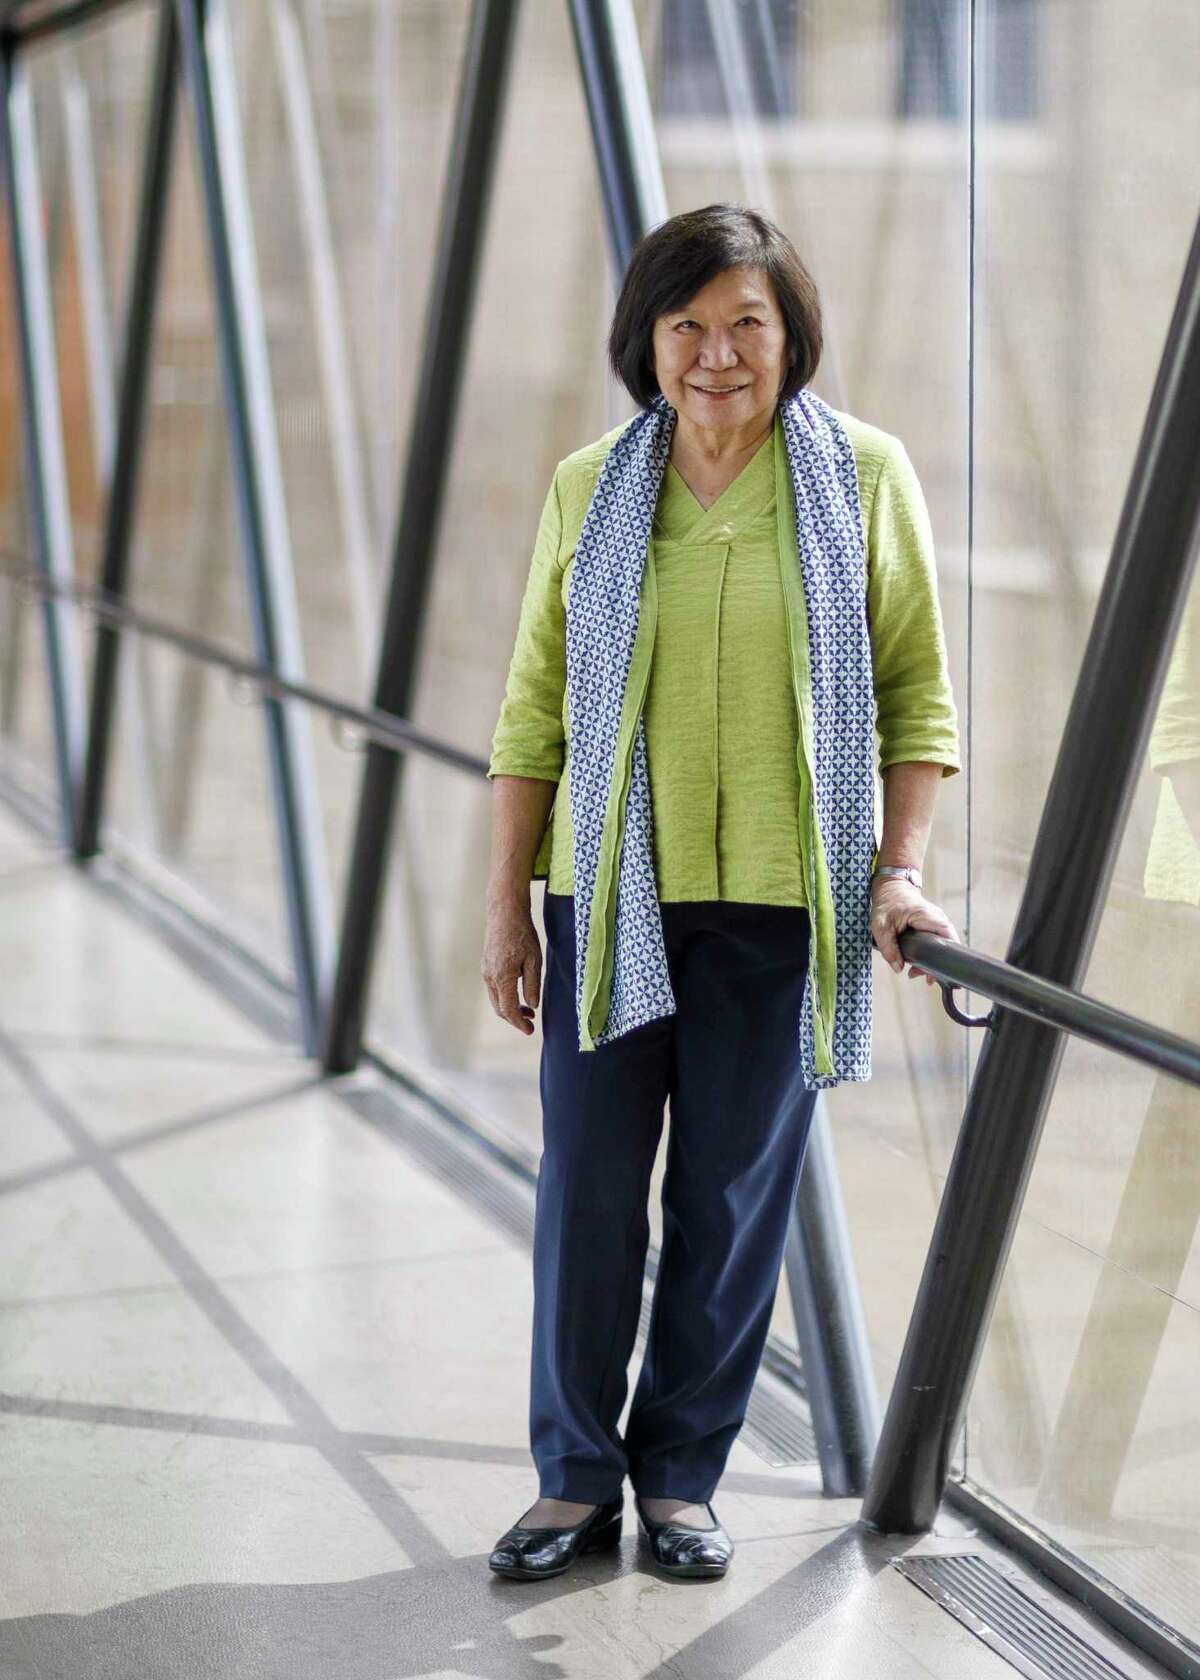 Co-Interim Director Dr. Emily Sano stands in the glass sky bridge that connects parts of San Antonio Museum of Art in San Antonio, Texas, Friday, Oct. 1, 2021. She joined the SAMA staff in January 2016 as the Coates-Cowden-Brown Senior Advisor for Asian Art.